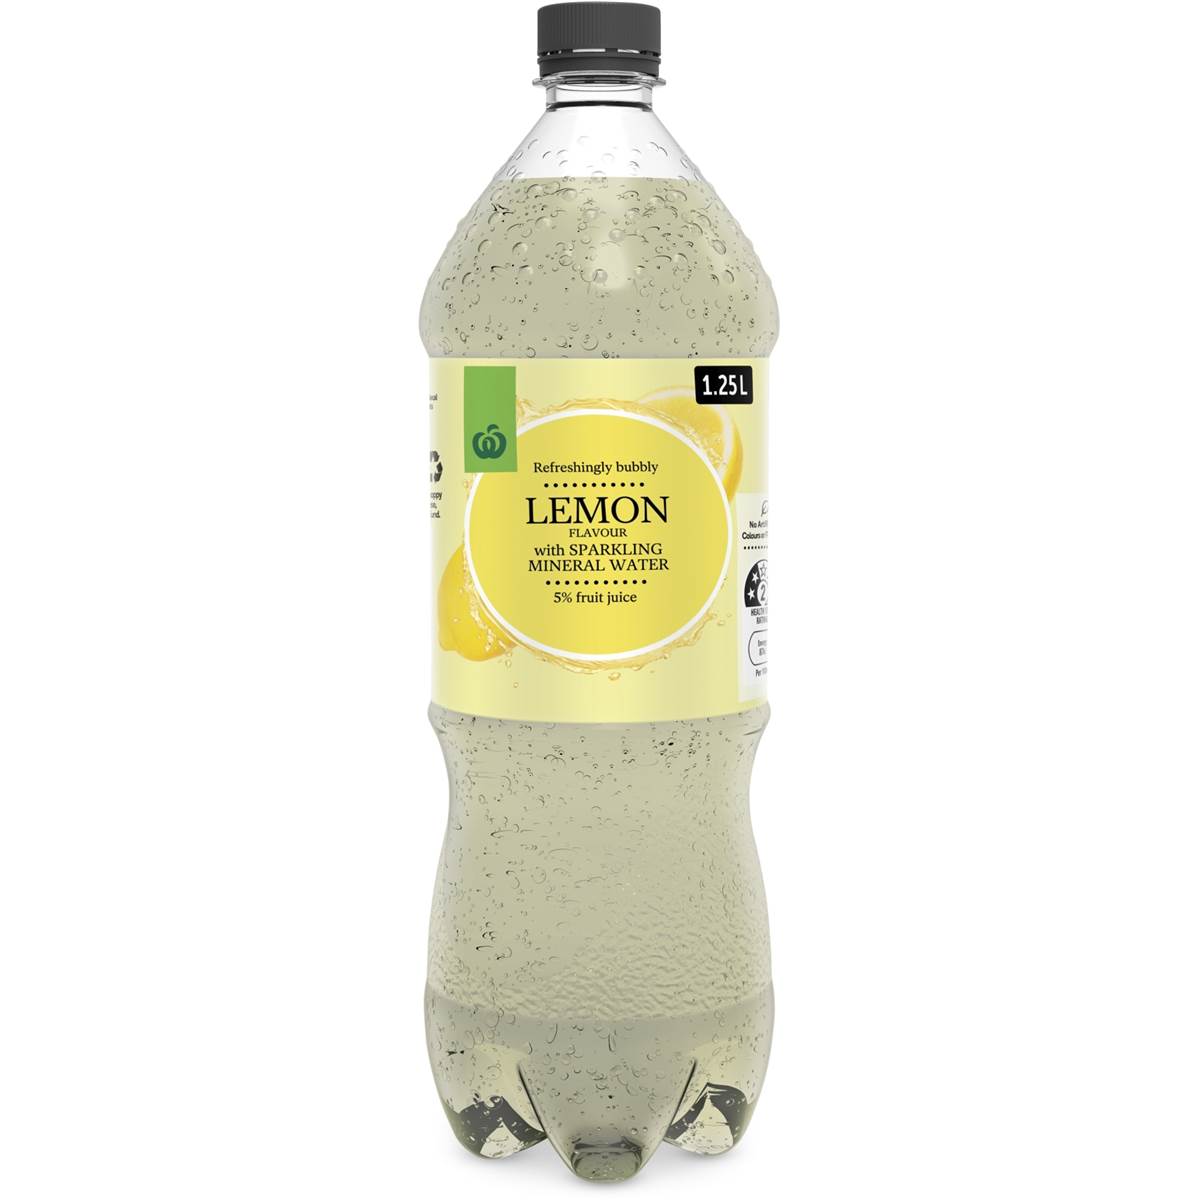 Calories in Woolworths Lemon Sparkling Mineral Water